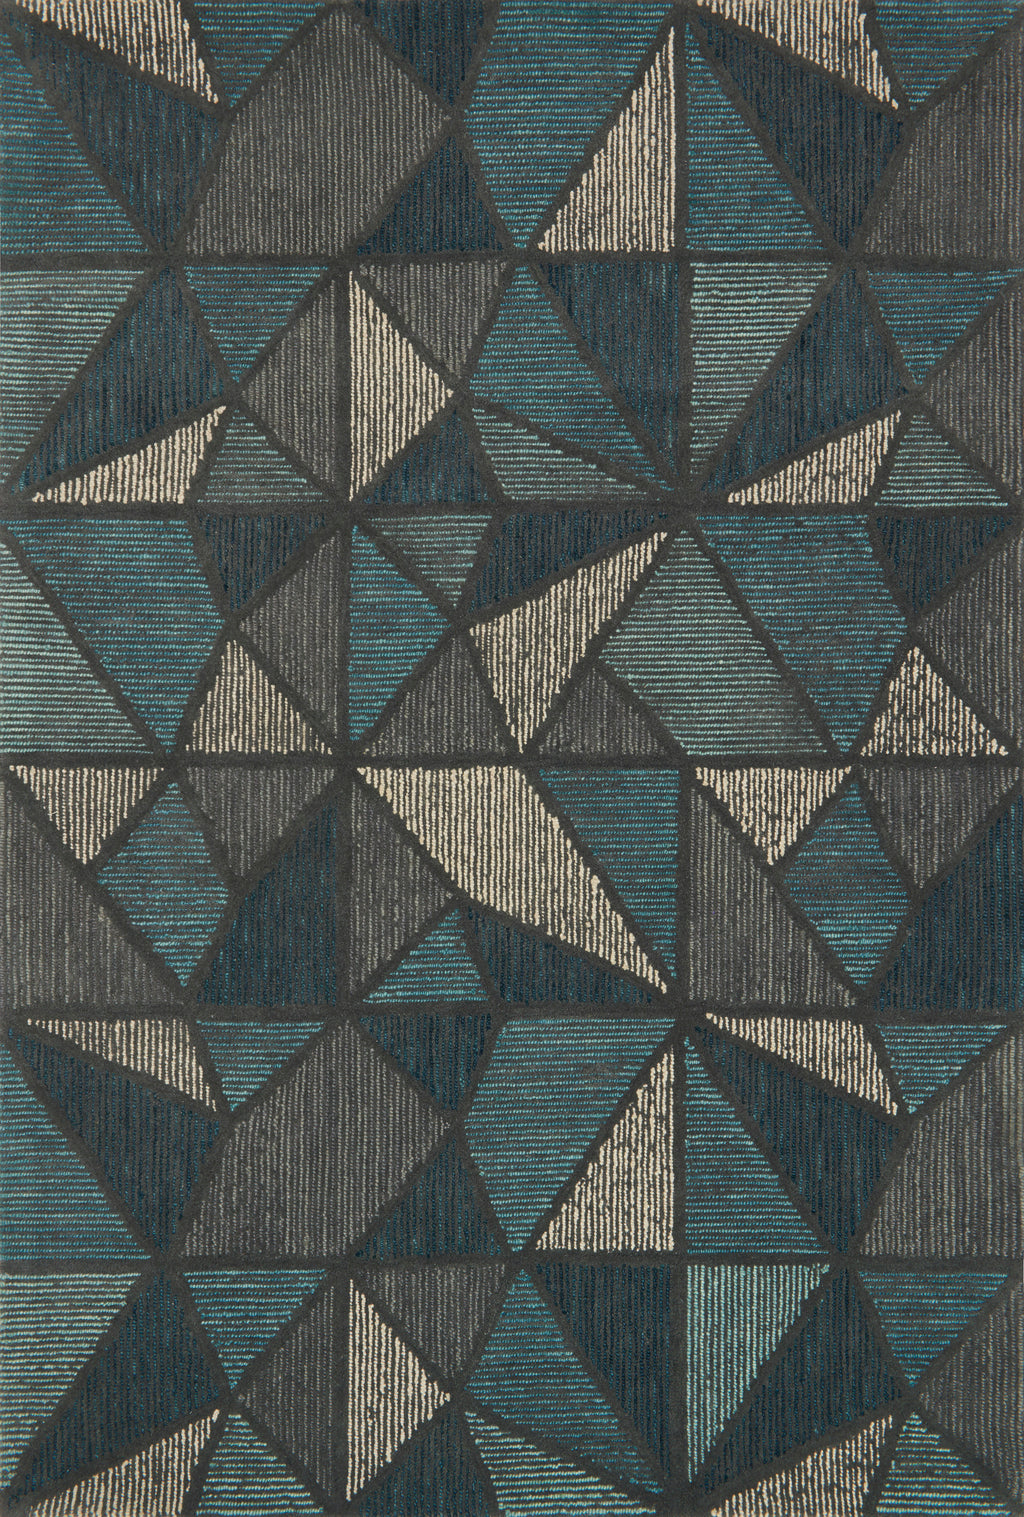 GEMOLOGY Collection Wool Rug  in  TEAL / GREY Blue Runner Hand-Tufted Wool